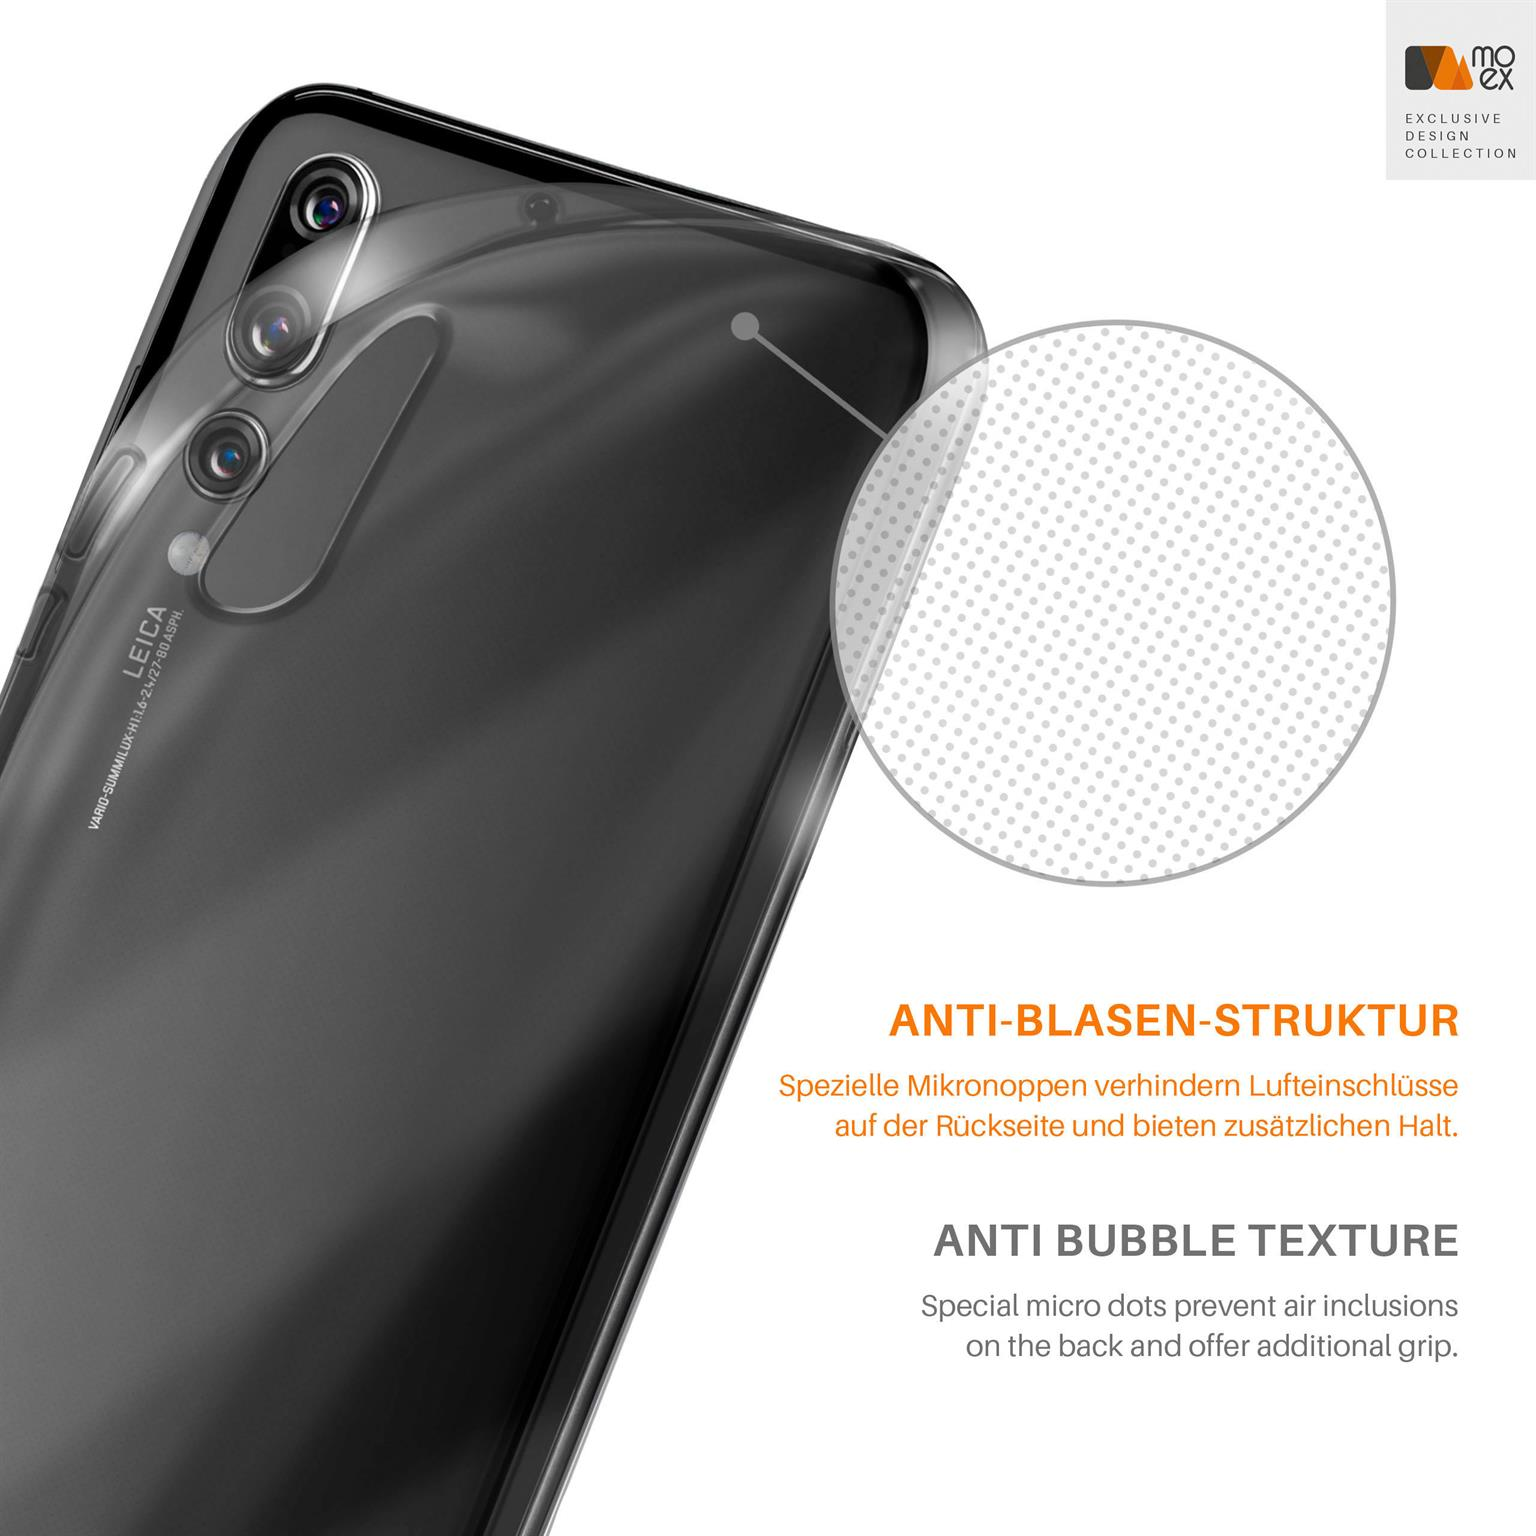 MOEX Aero Case, Backcover, Pro, Huawei, P20 Crystal-Clear